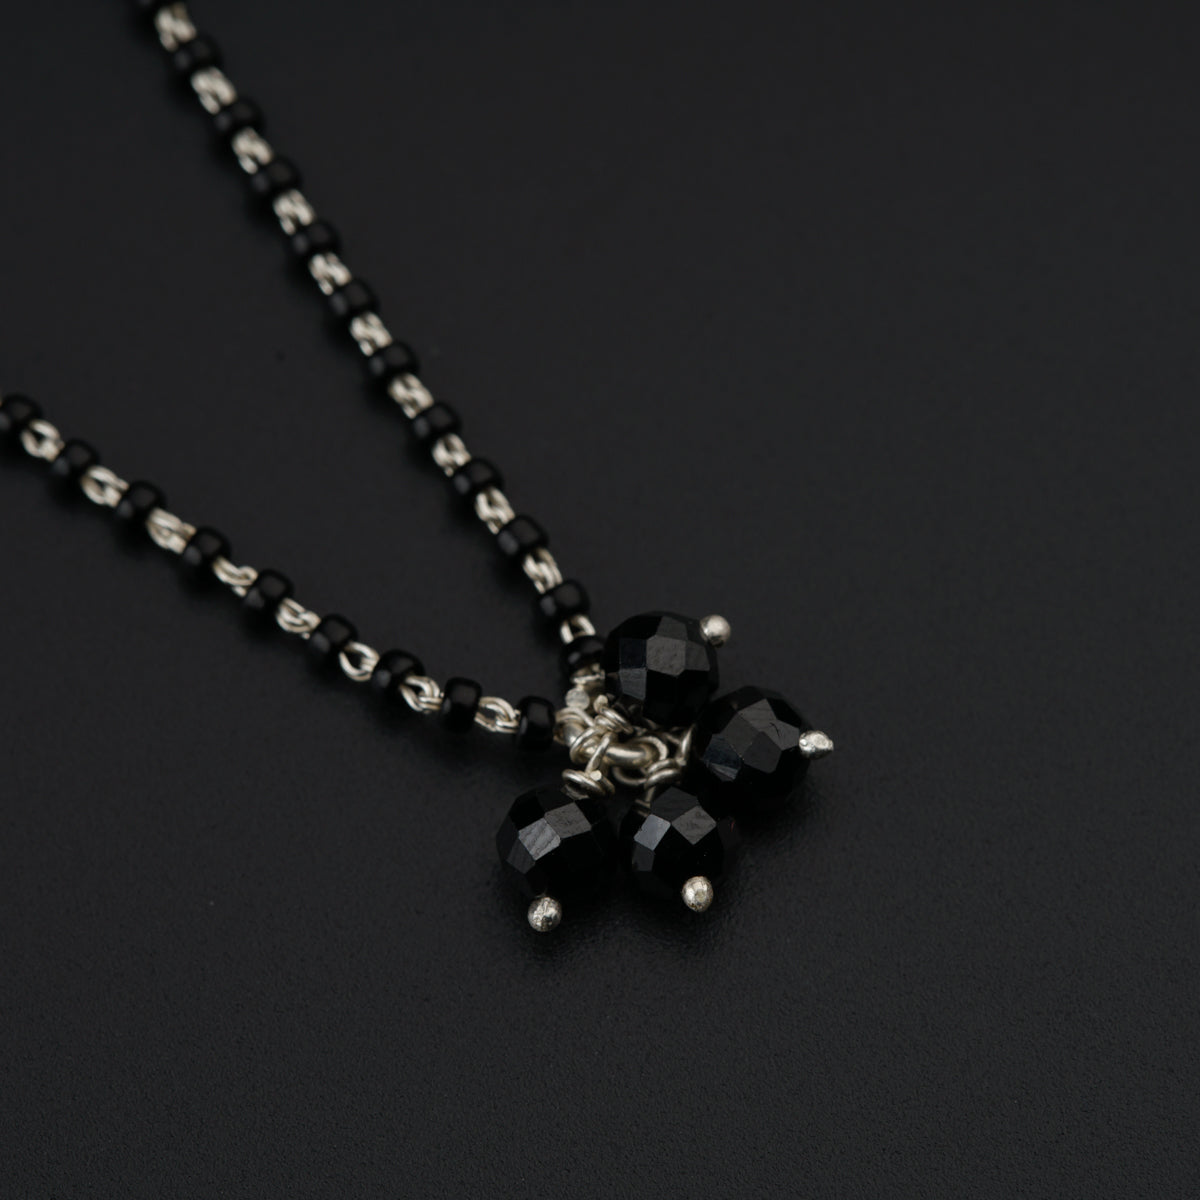 Handmade silver Mangalsutra with Black Spinel Bunch